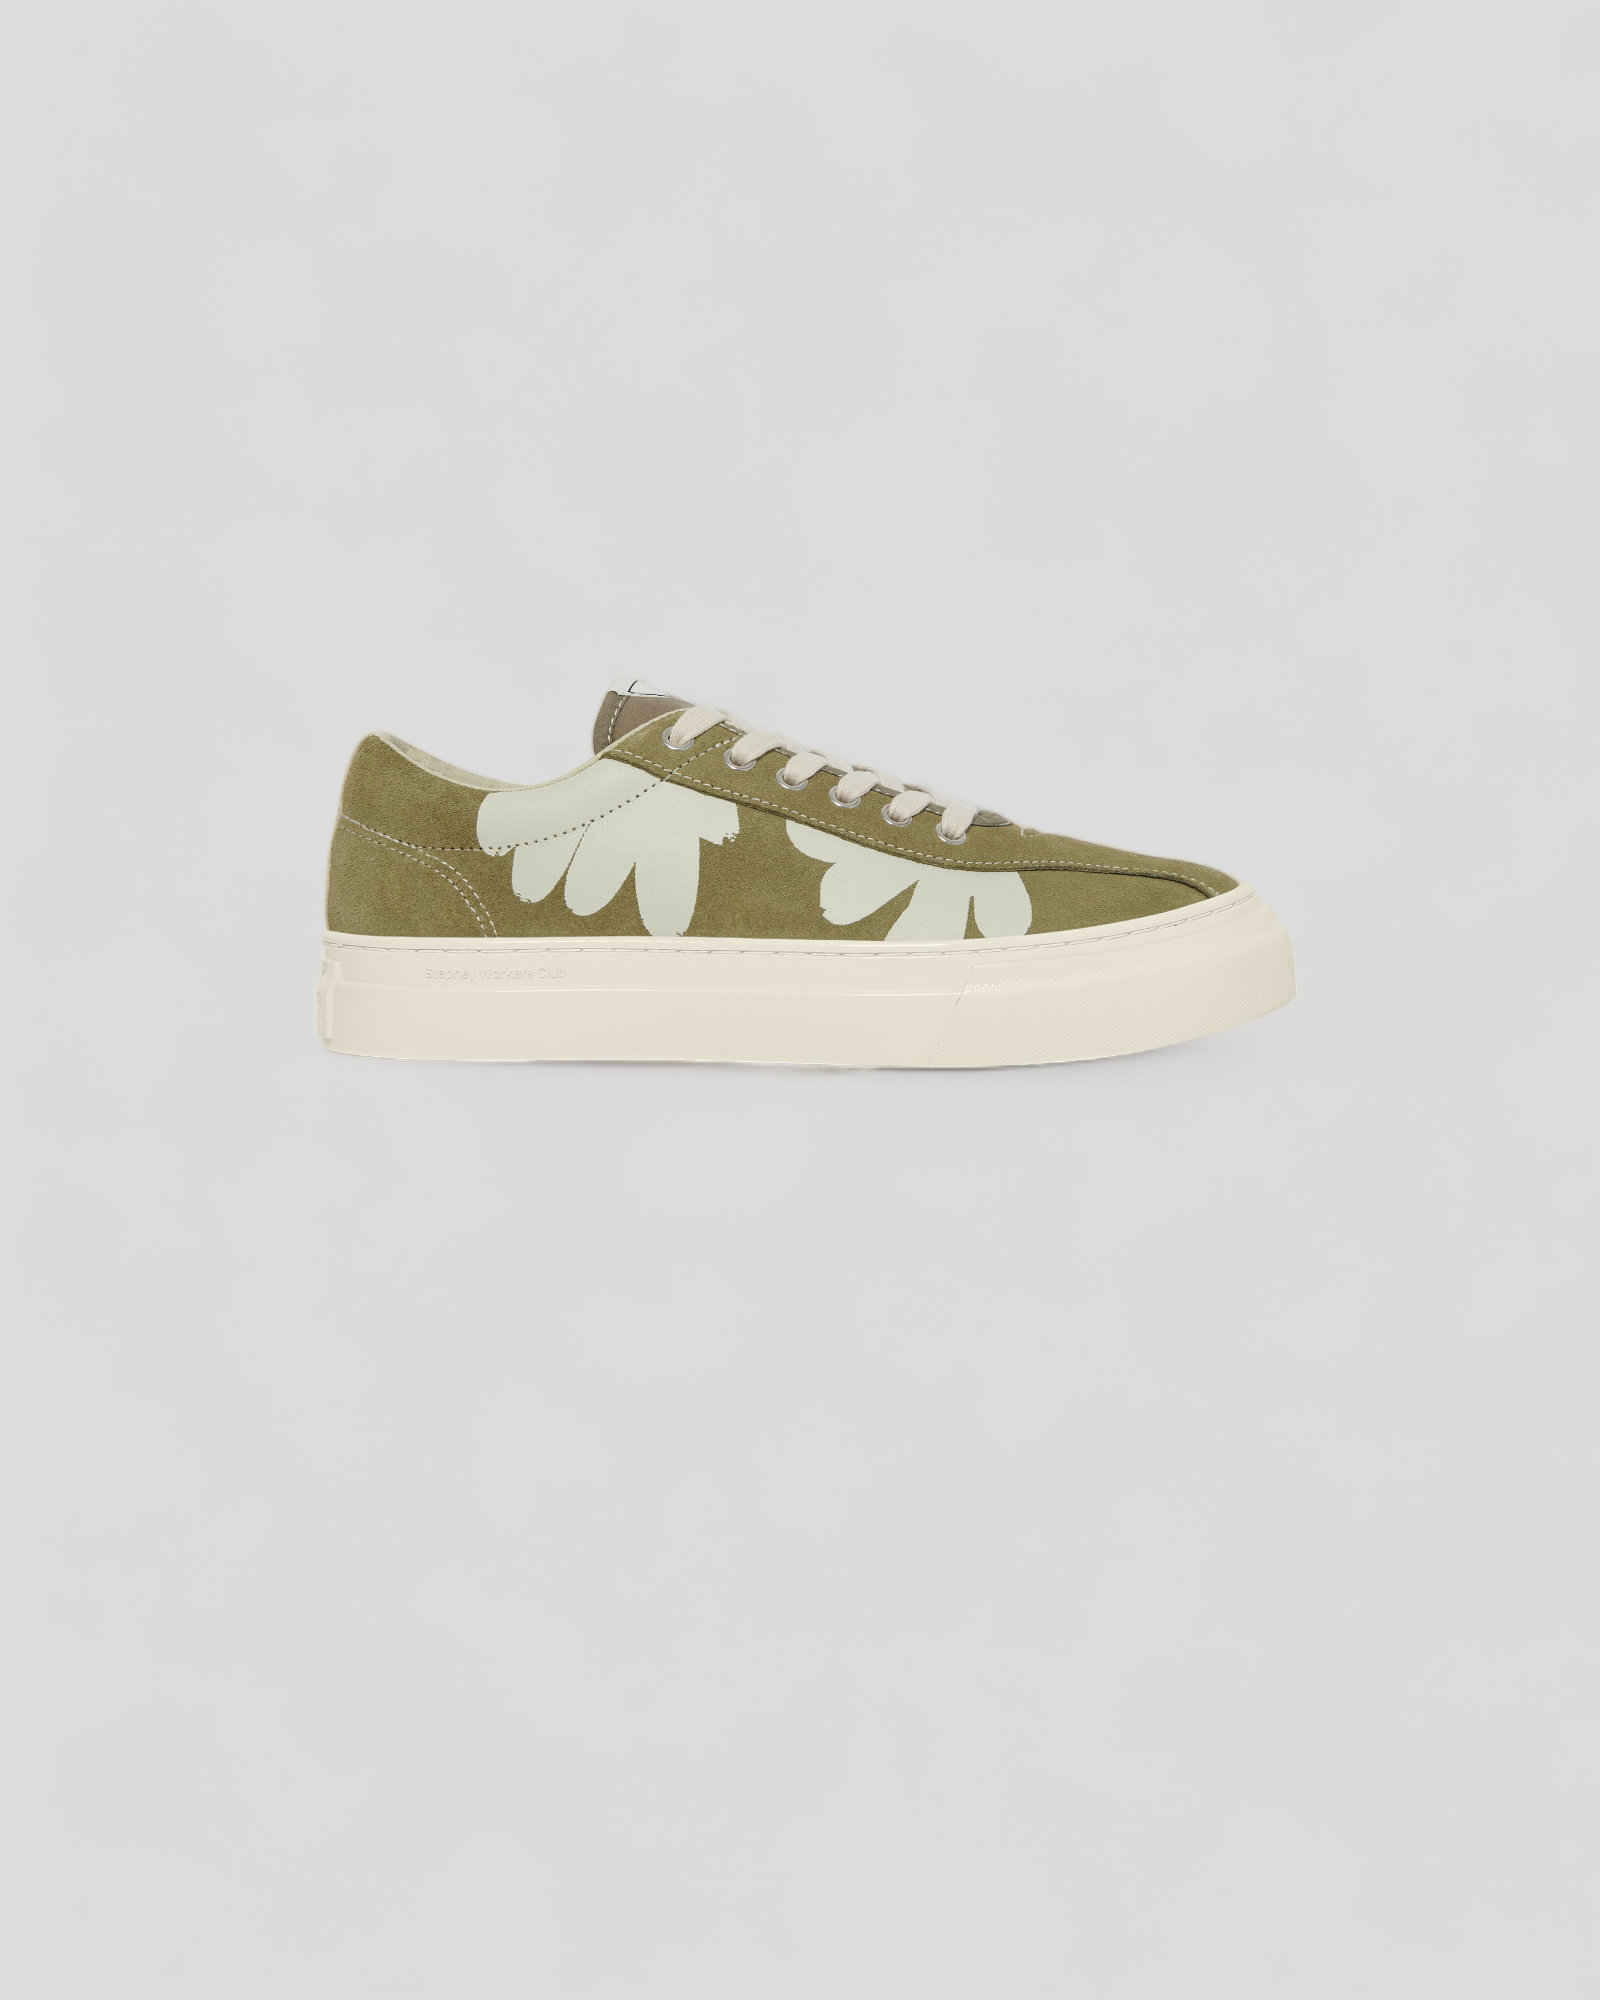 Stepney Workers Club || Dellow Cup Shroom Hands - Suede - Moss/ White